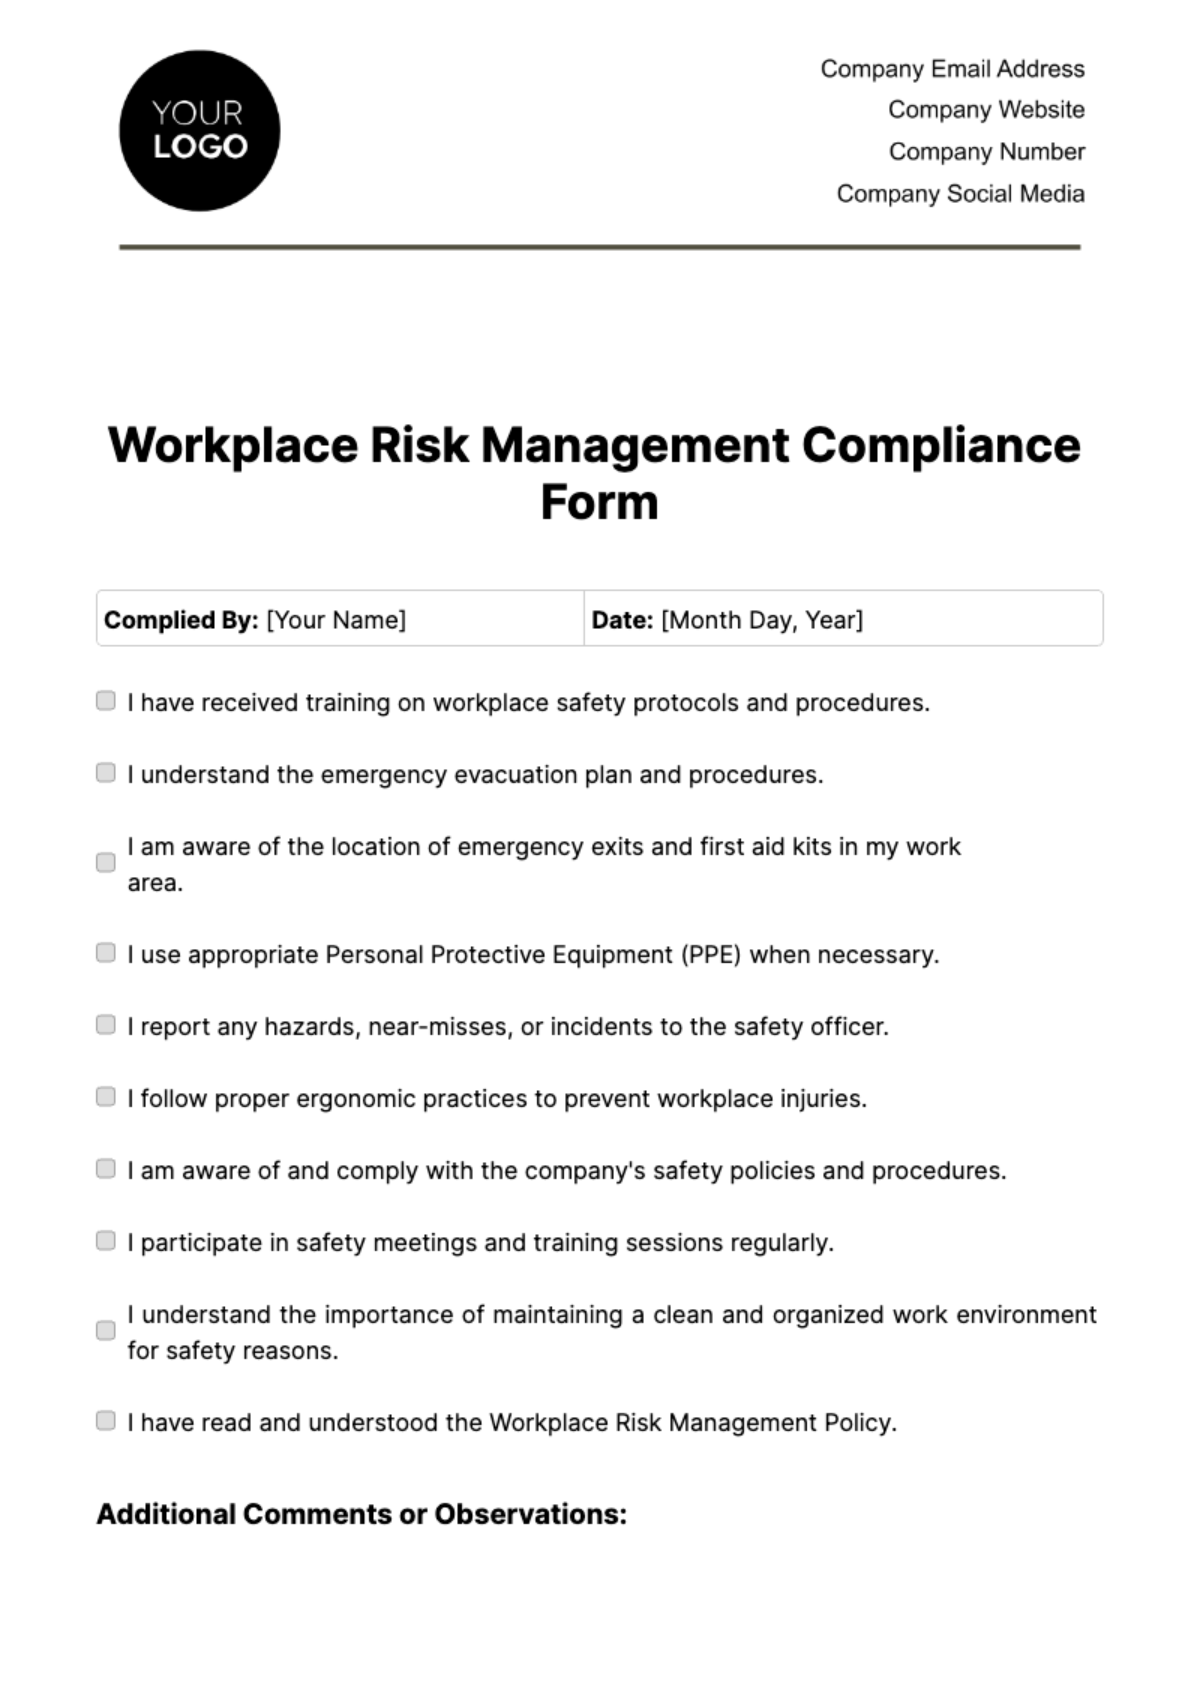 Workplace Risk Management Compliance Form Template